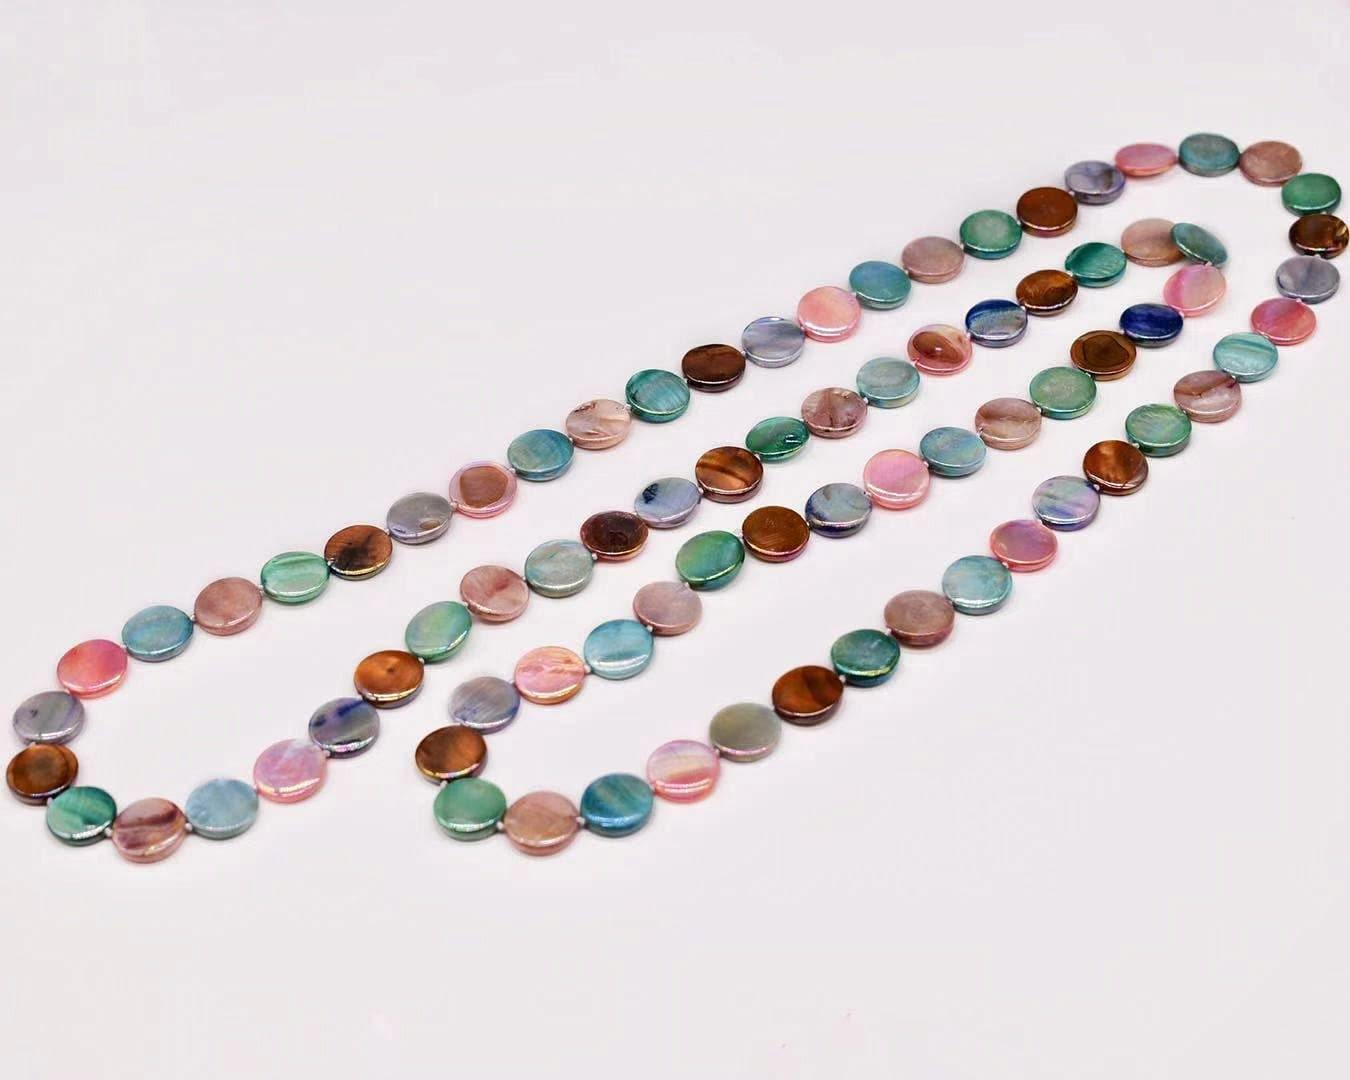 Mother of Pearls Long Necklace - Disc - Akuna Pearls